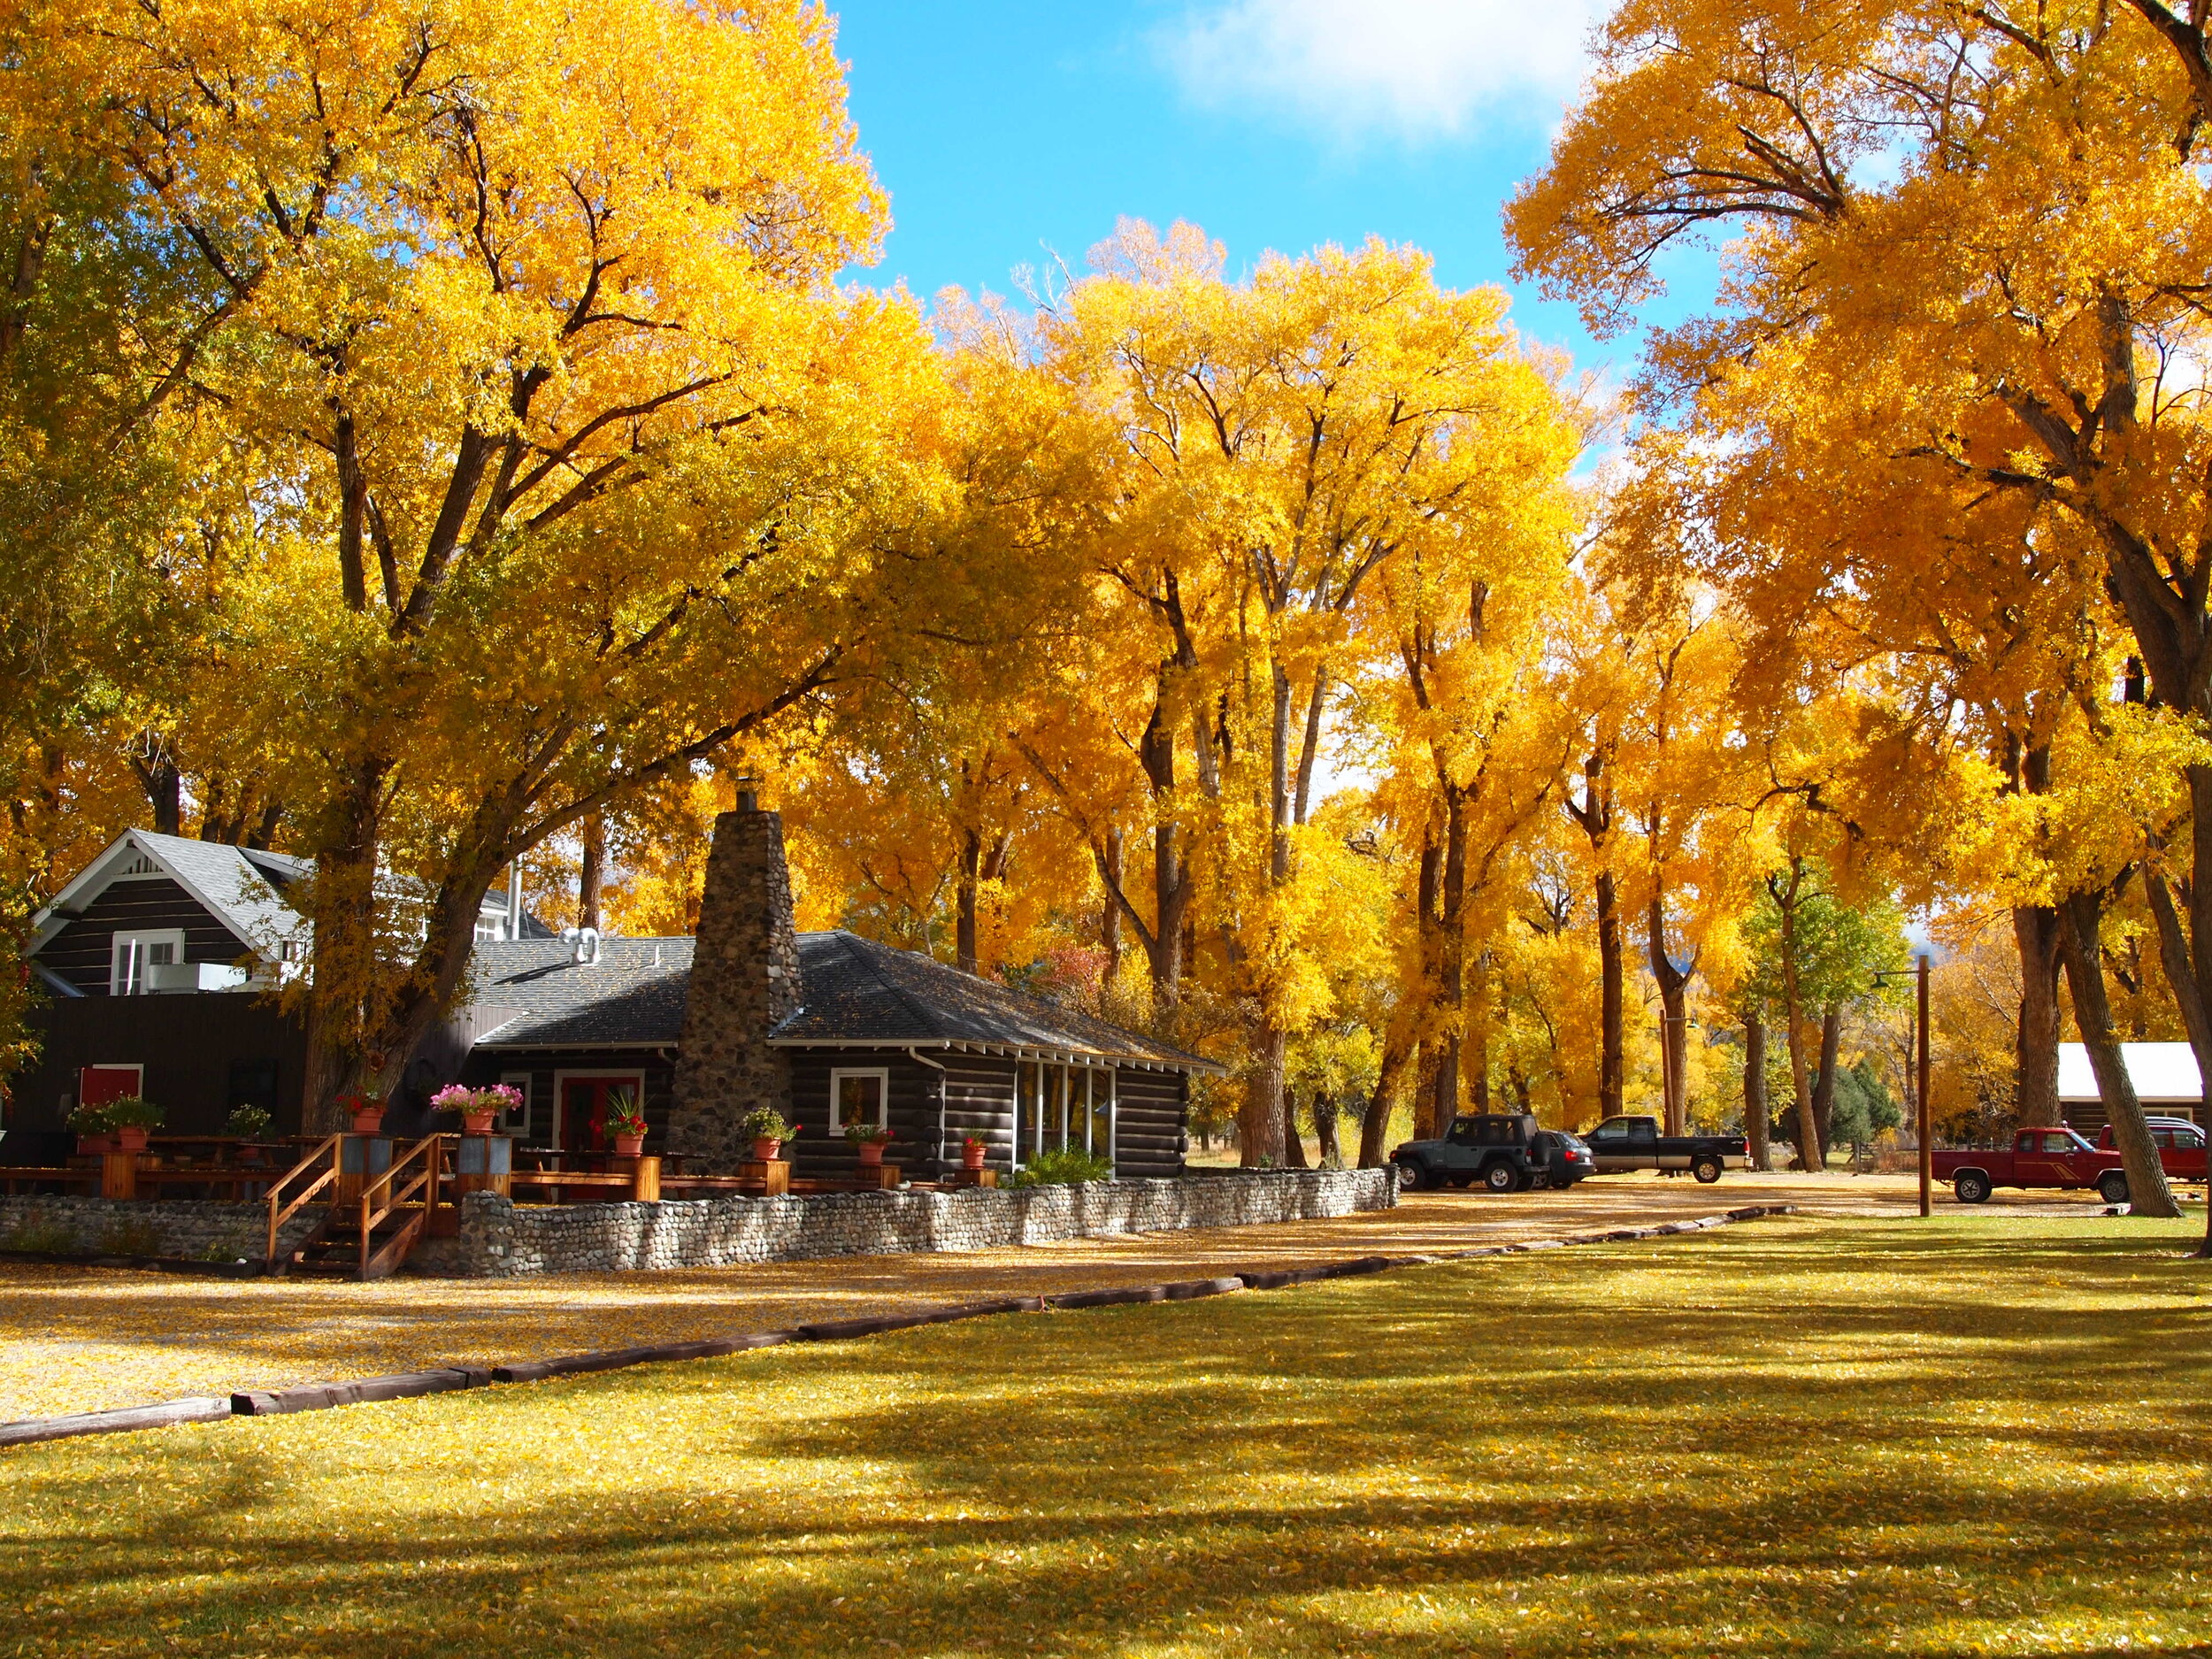   The lodge in autumn (photo credit: Ranchlands)  